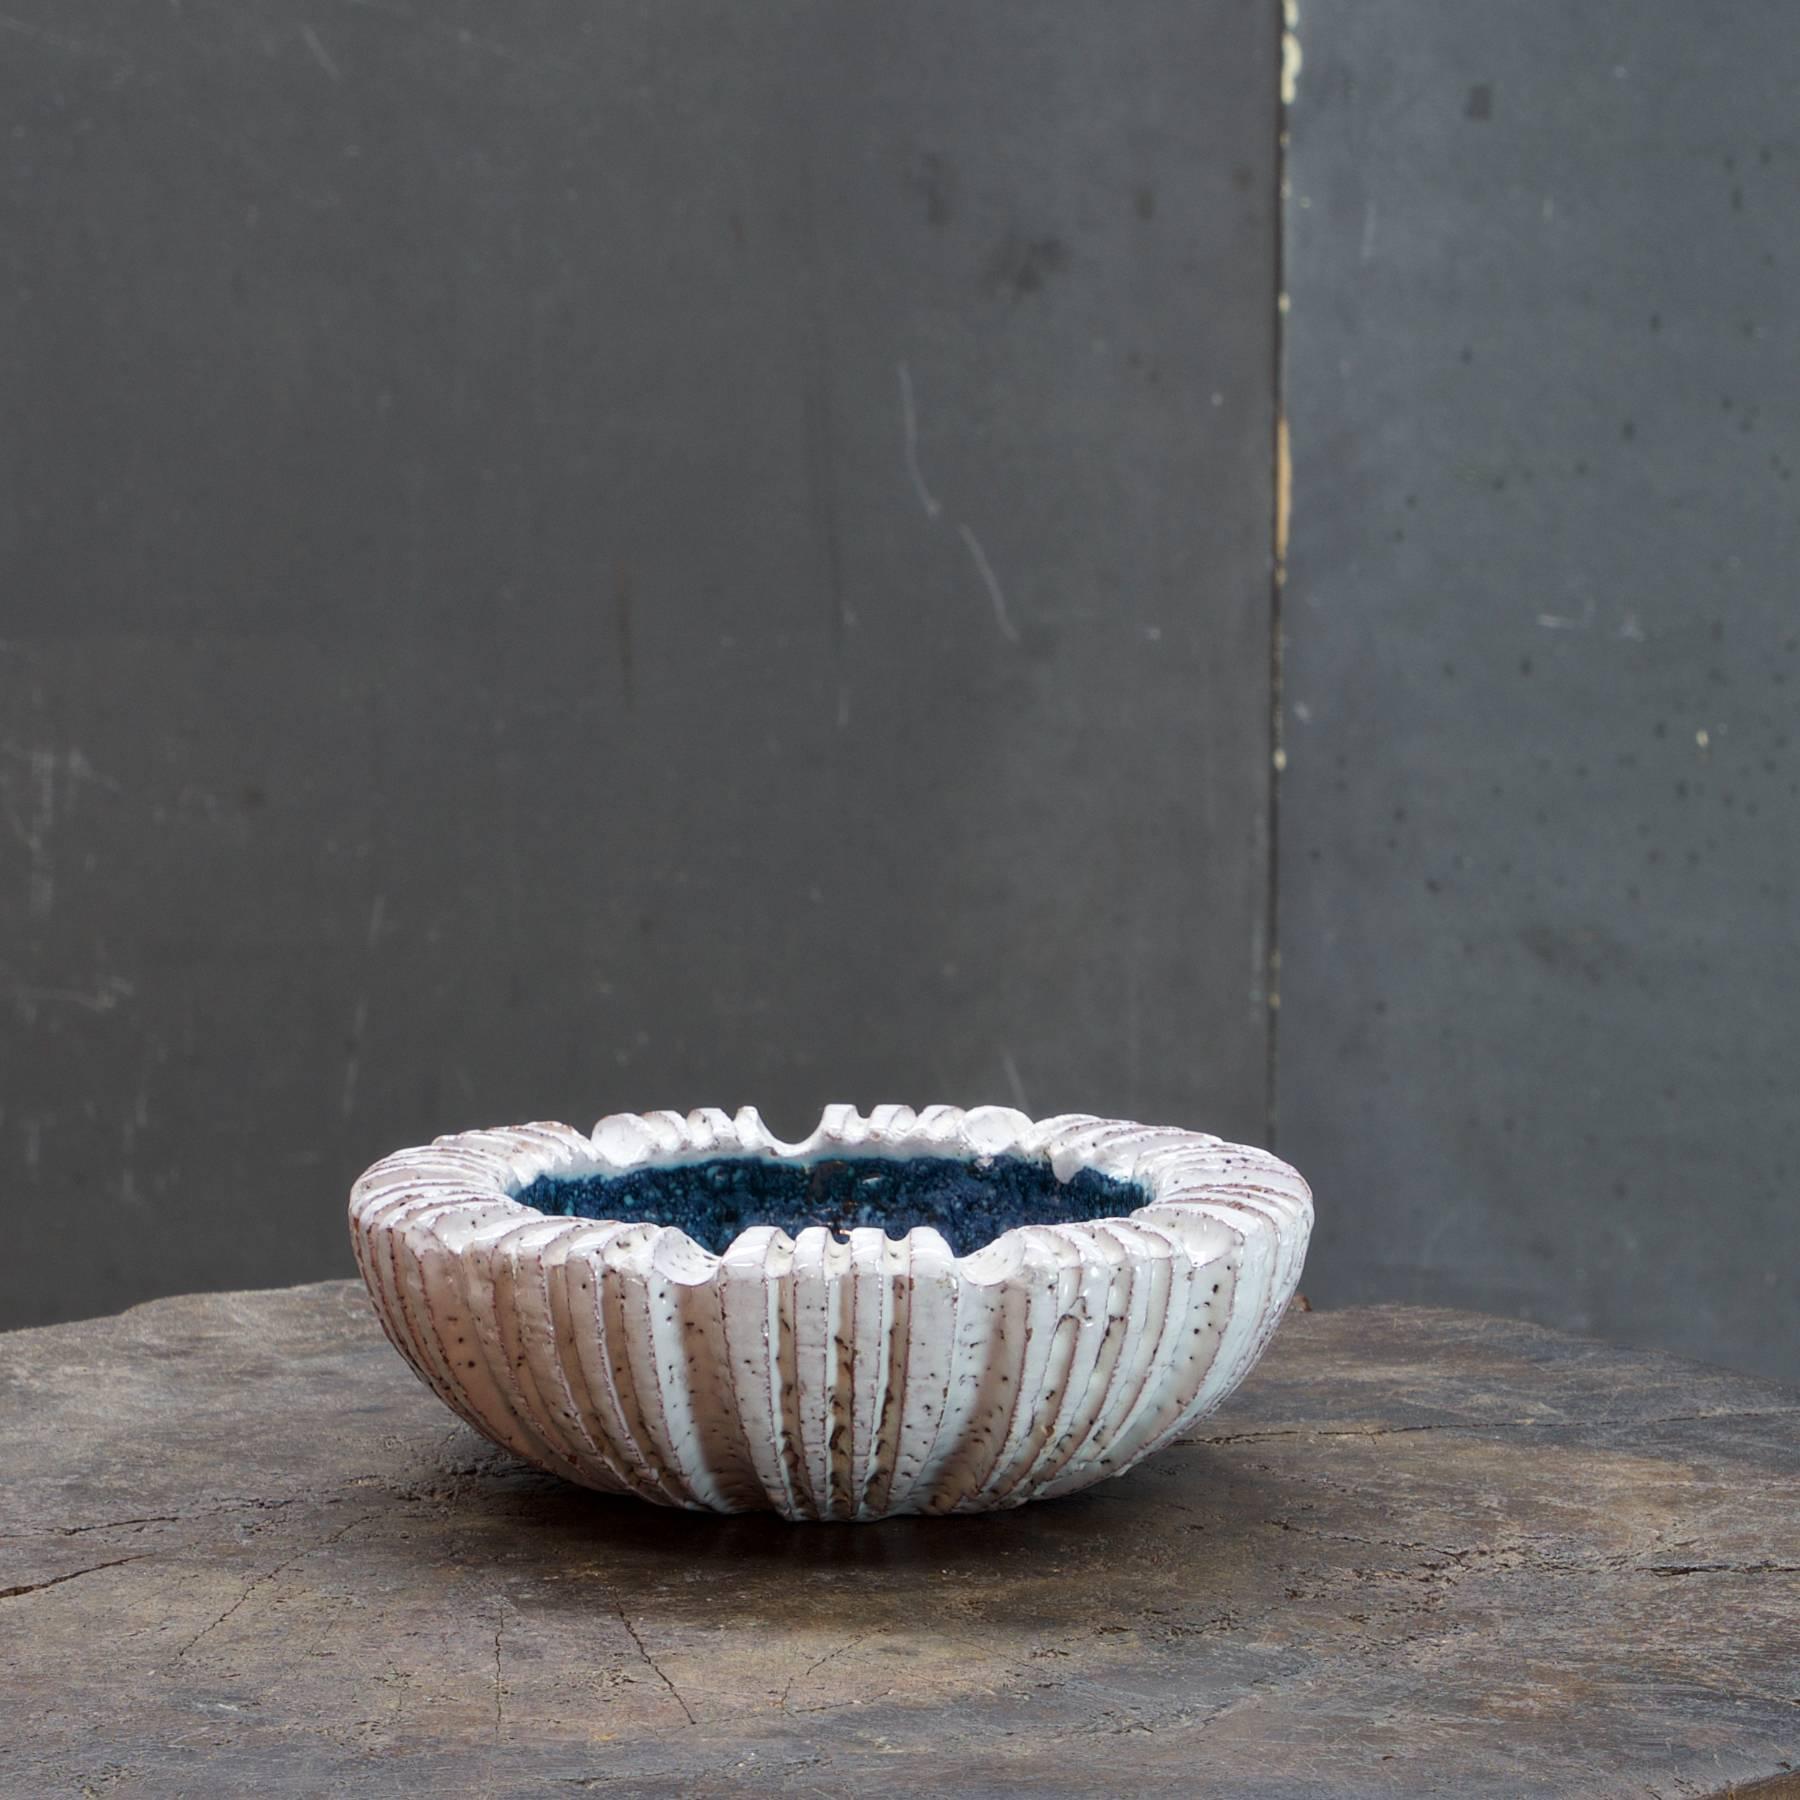 Hand built stoneware bowl or ashtray with white and blue speckled and dappled glazes, signed and dated, 1950.